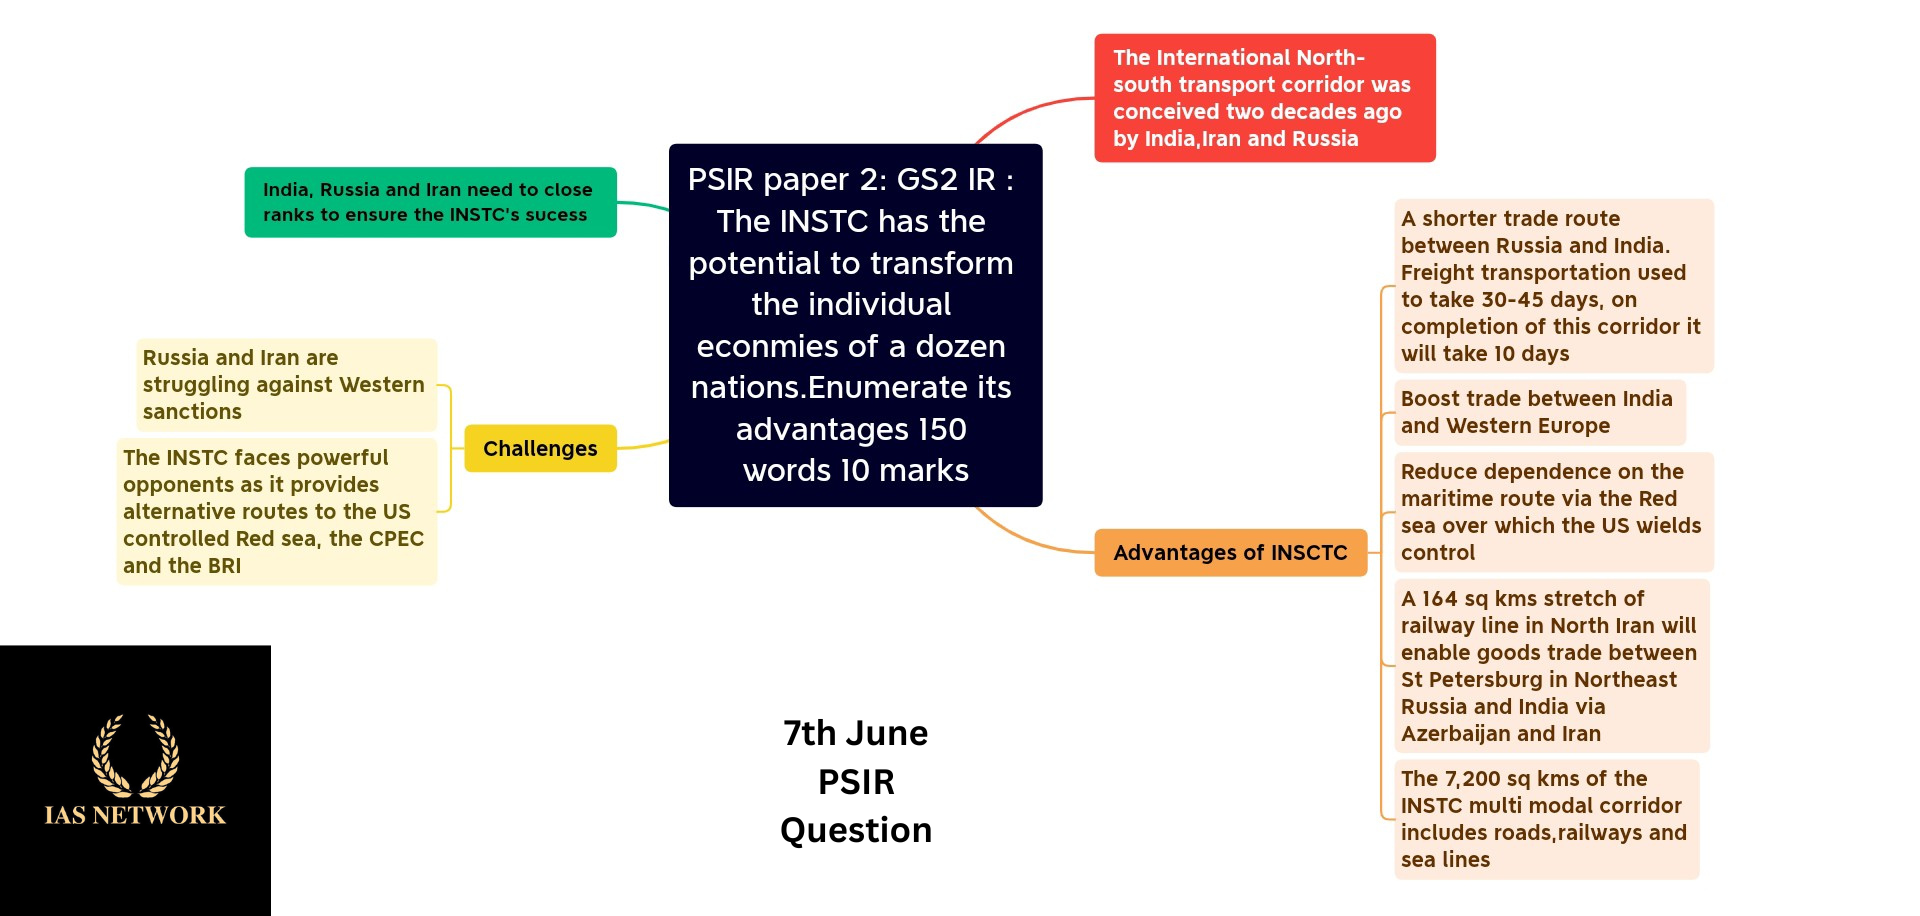 IAS NETWORK 7th JUNE PSIR QUESTION